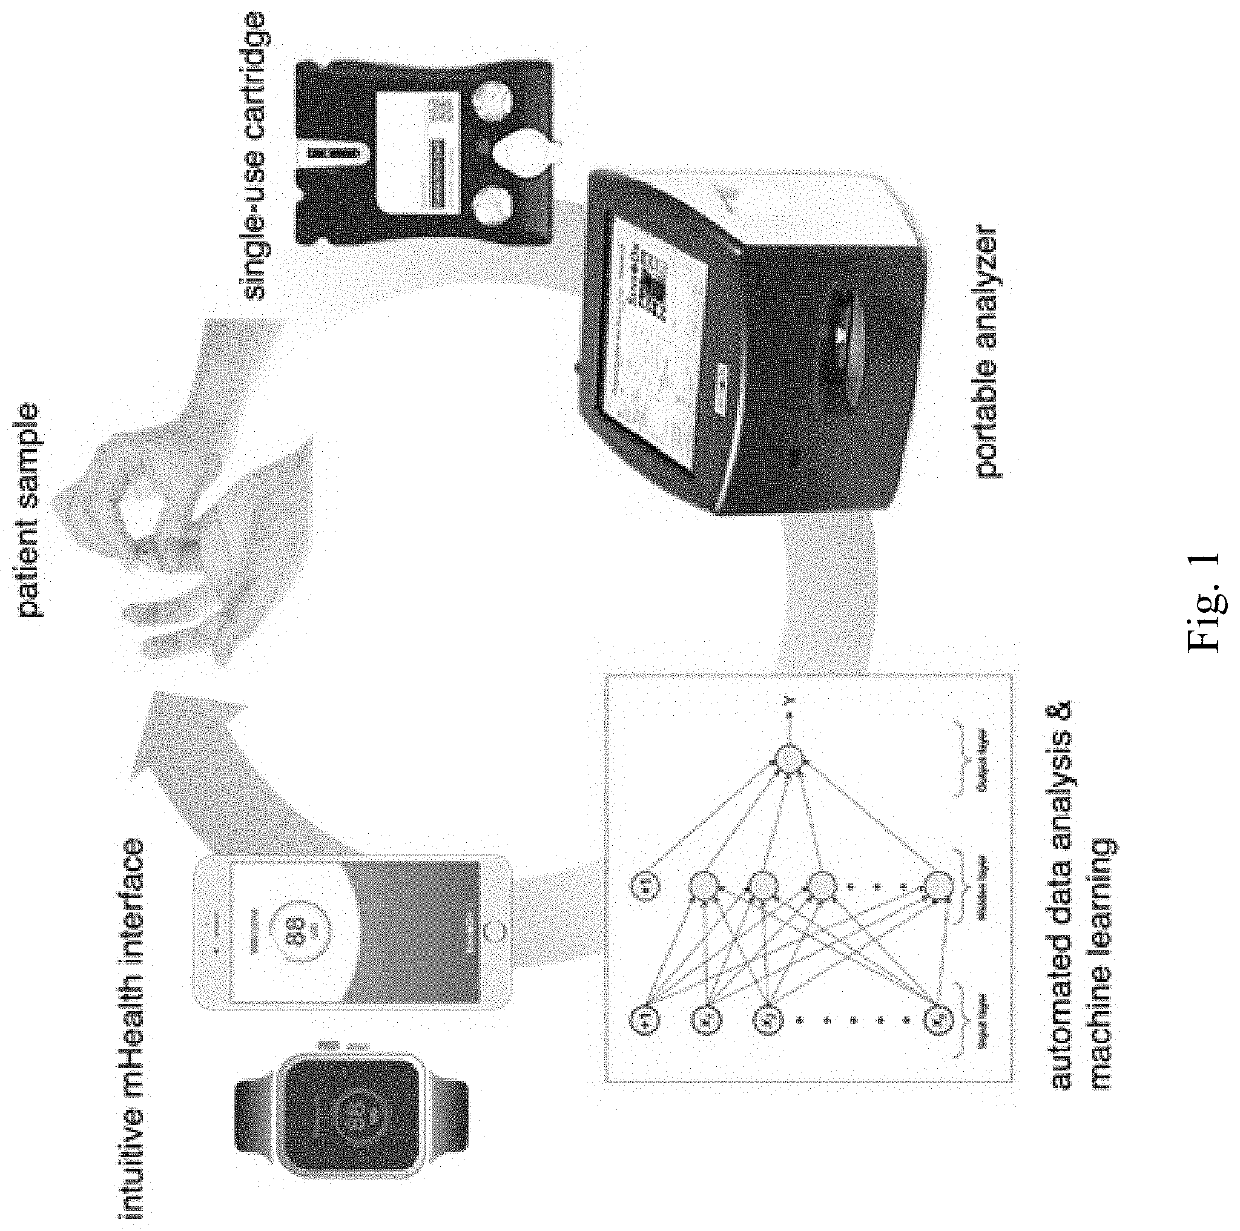 System and Method for Disease Surveillance and Disease Severity Monitoring for COVID-19